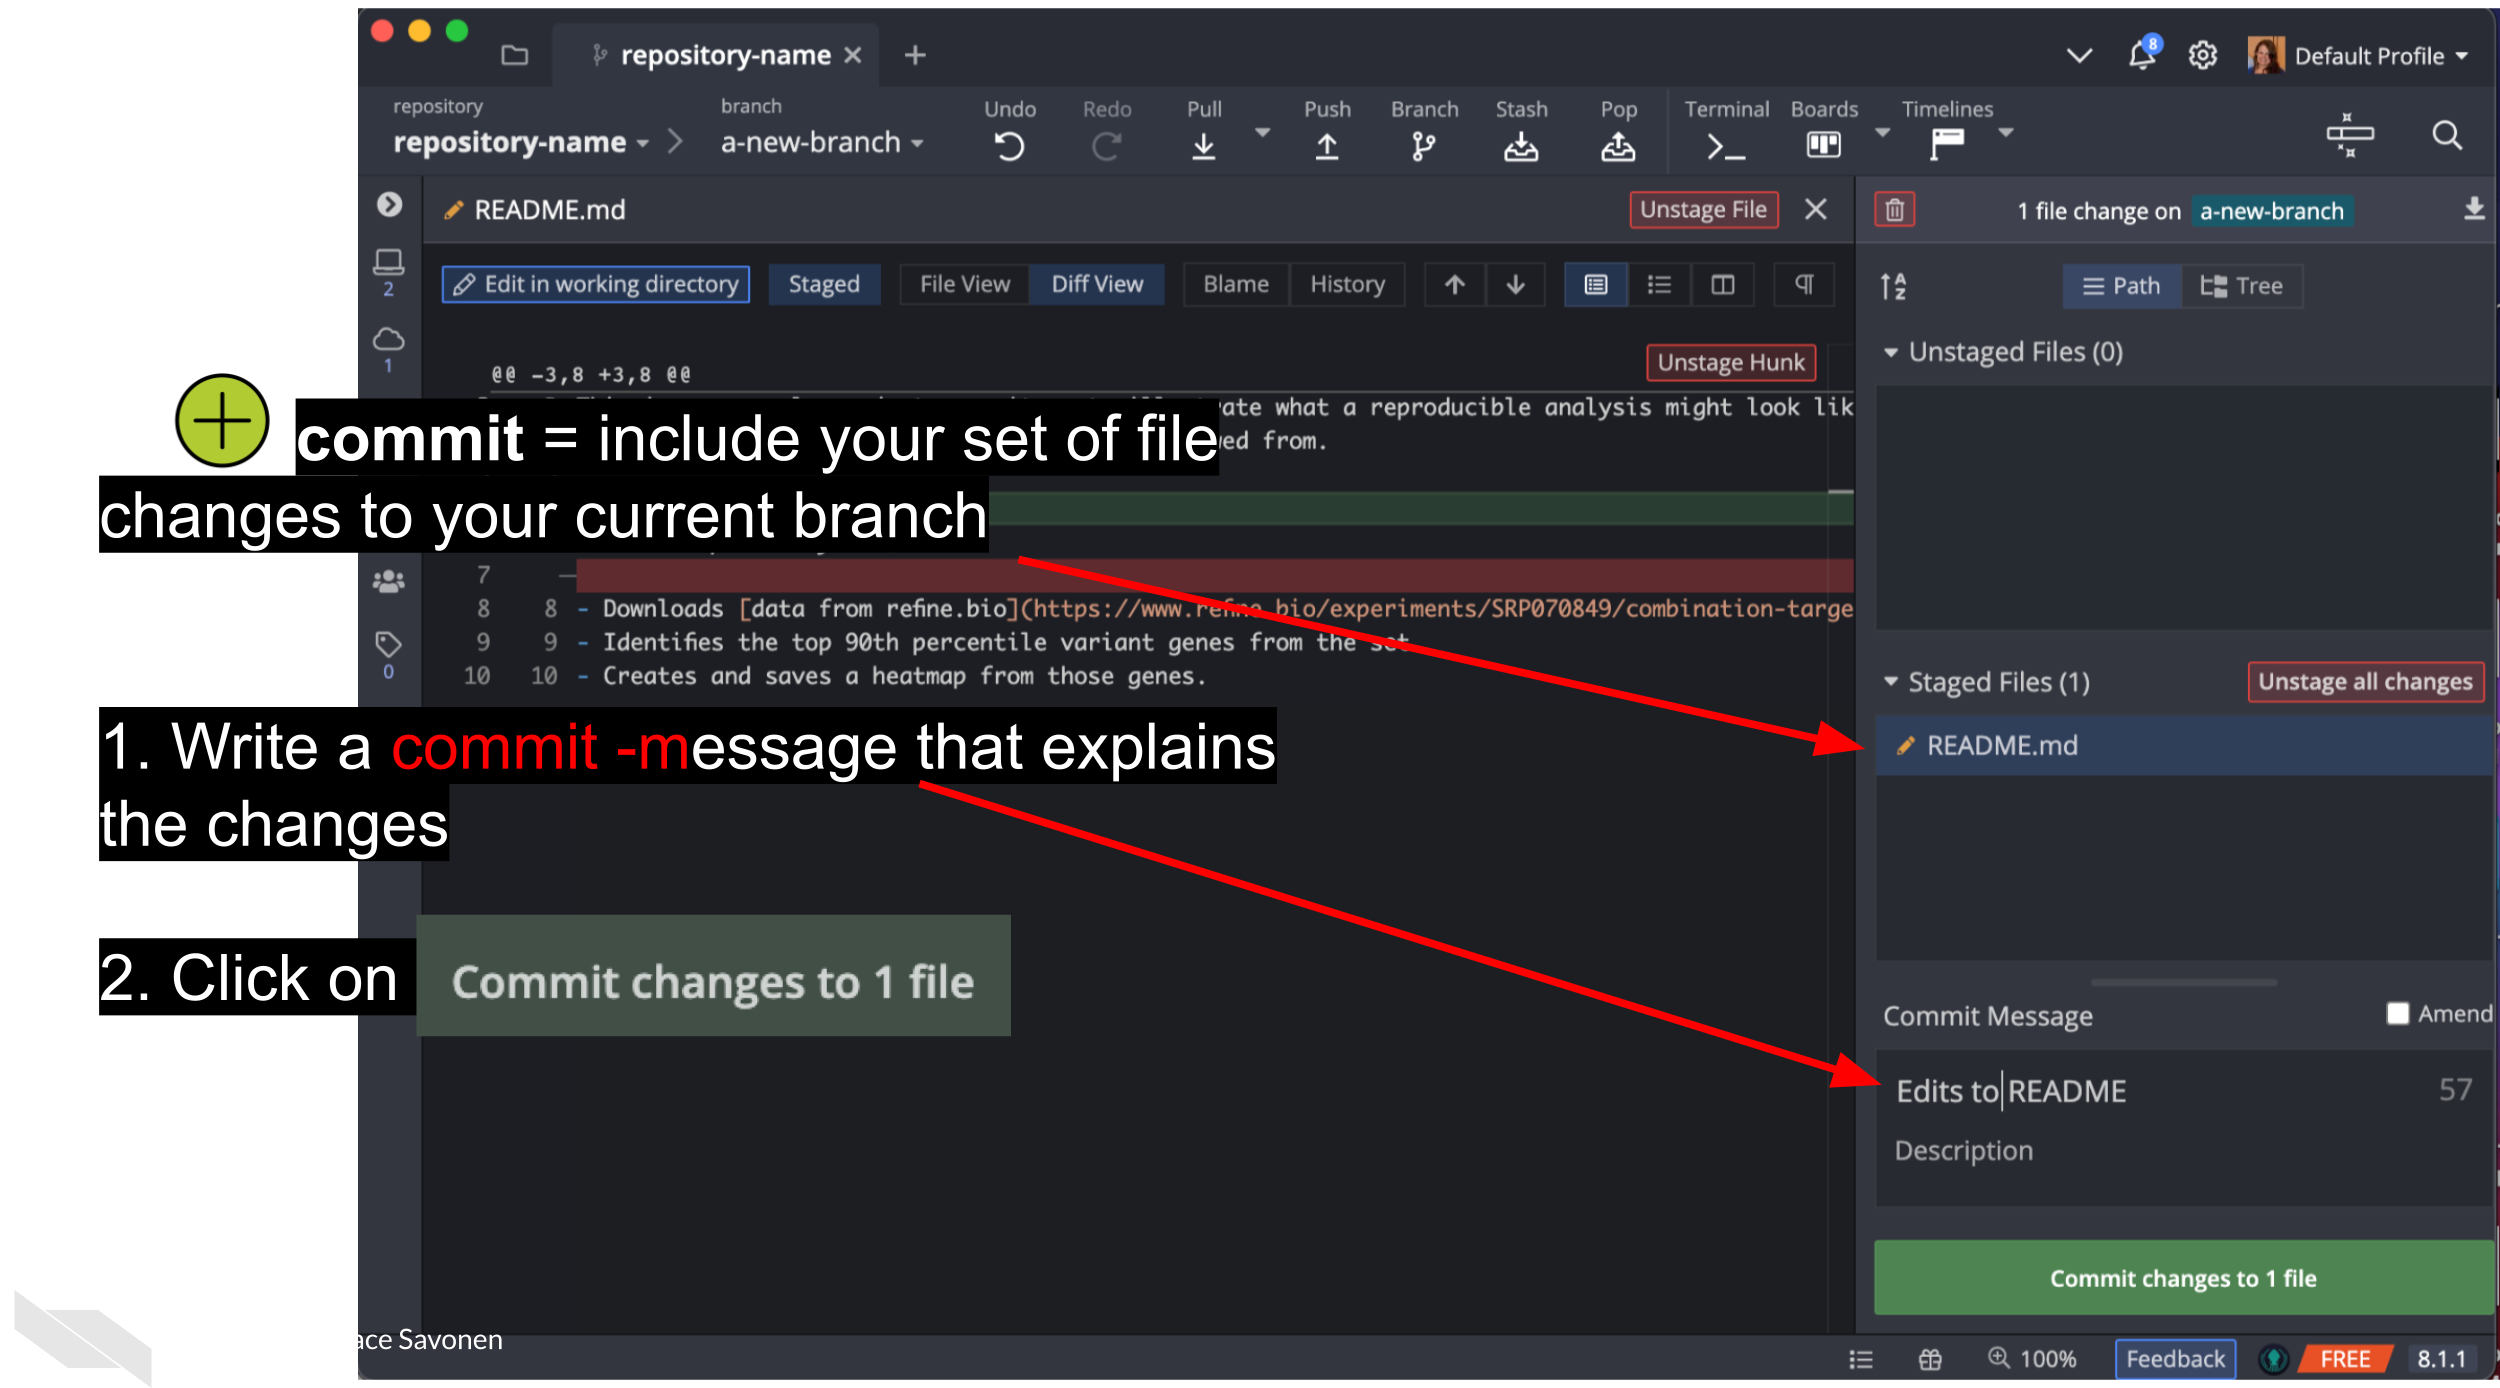 To commit files is to include your set of file changes to your current branch. Write a commit message that explains the changes. Now click on the button that says Commit changes to 1 file.